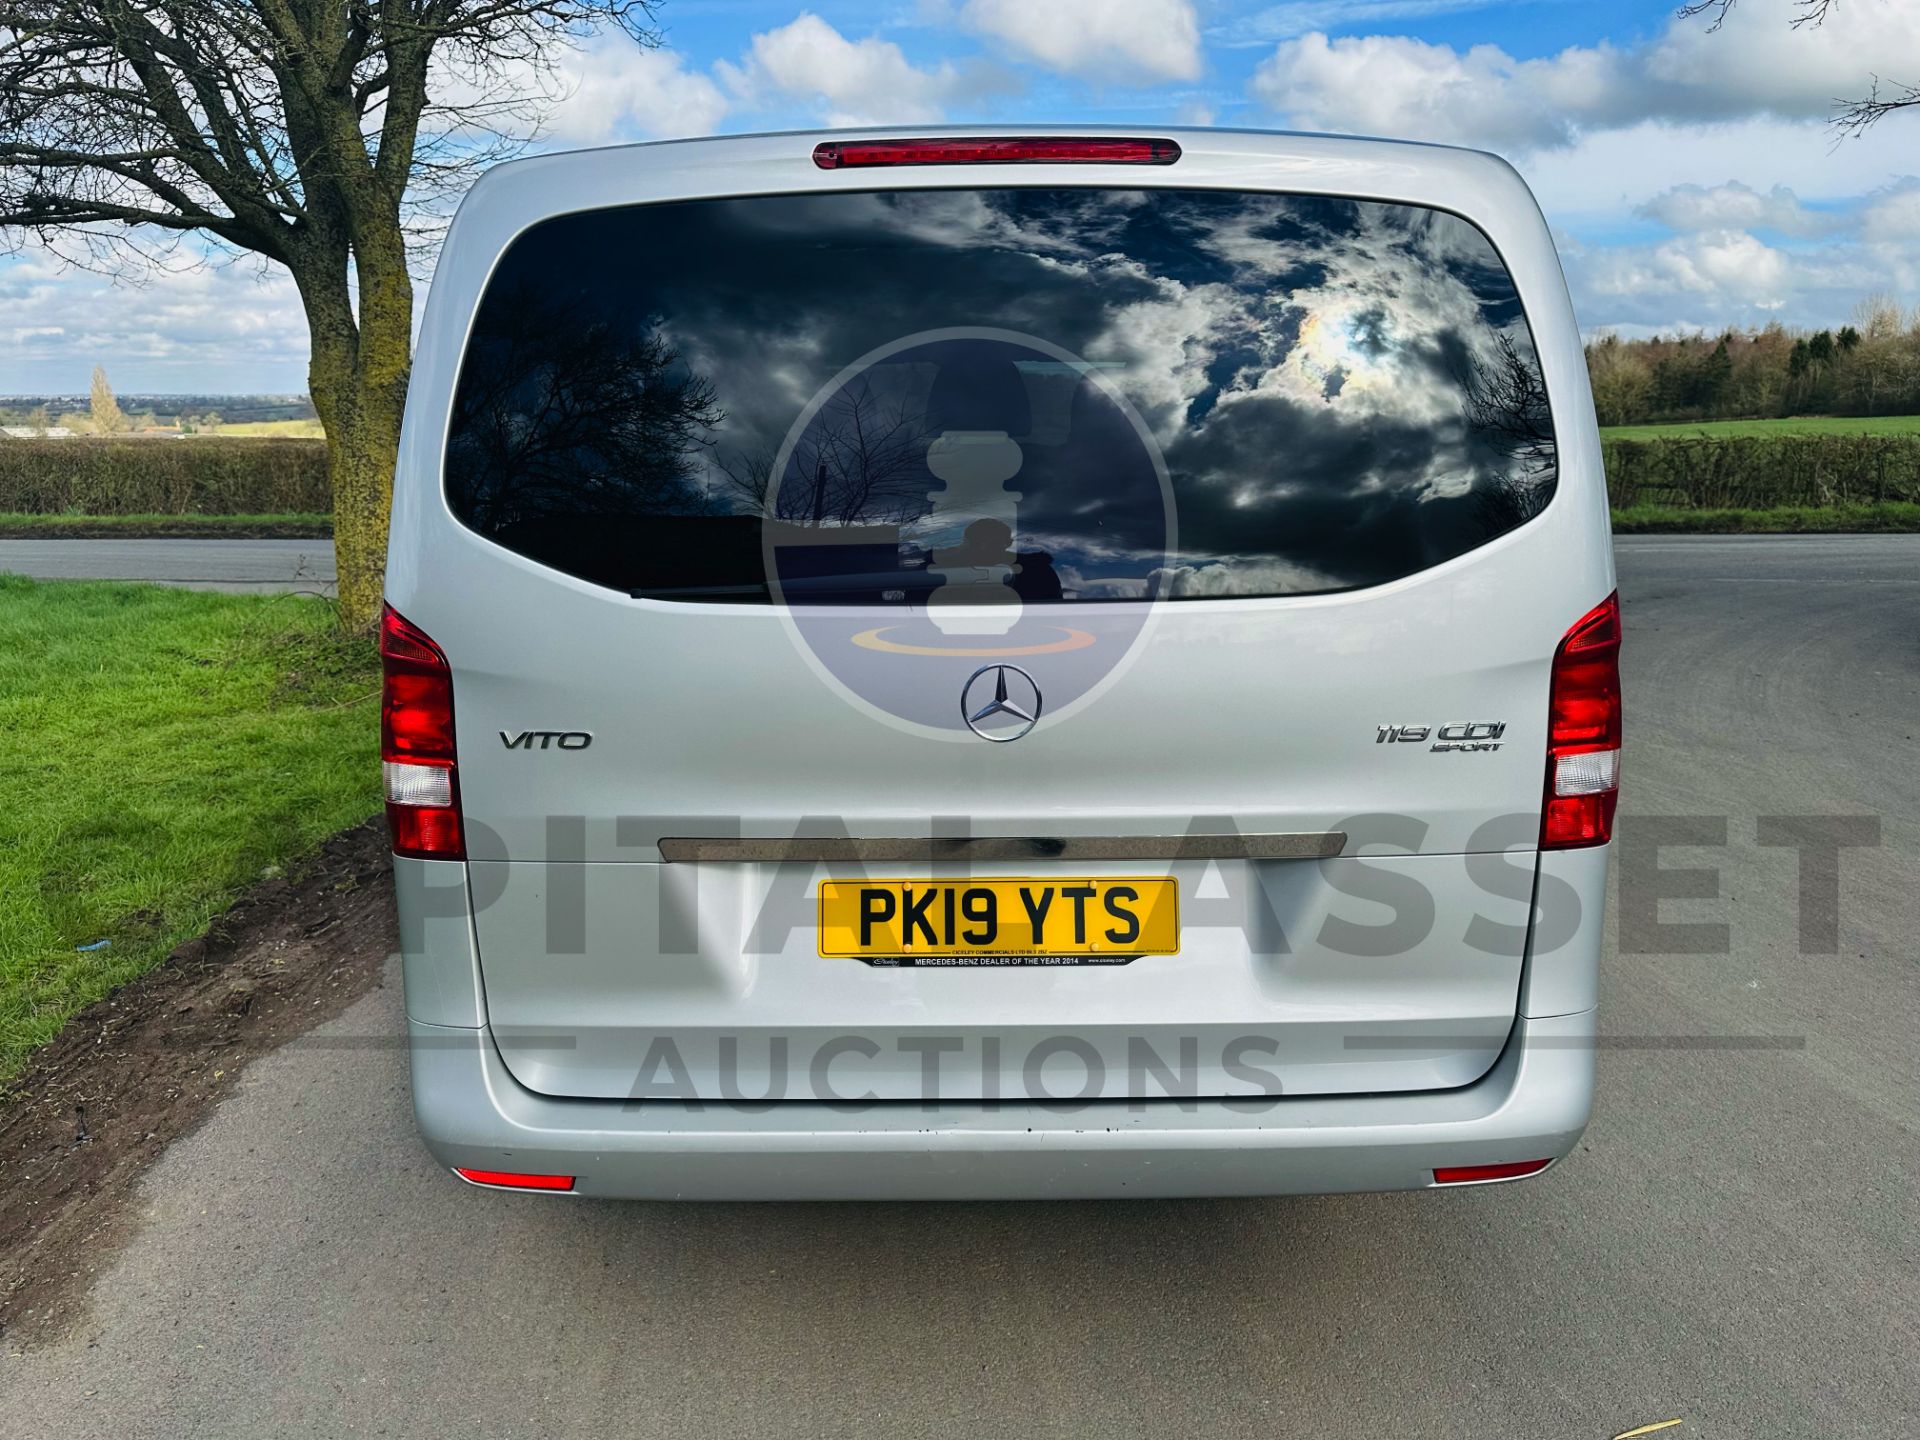 MERCEDES-BENZ VITO 119 CDI *SPORT "LWB DUALINER" 7G AUTOMATIC - 19 REG - ONLY 74K MILES - WOW!!! - Image 11 of 38